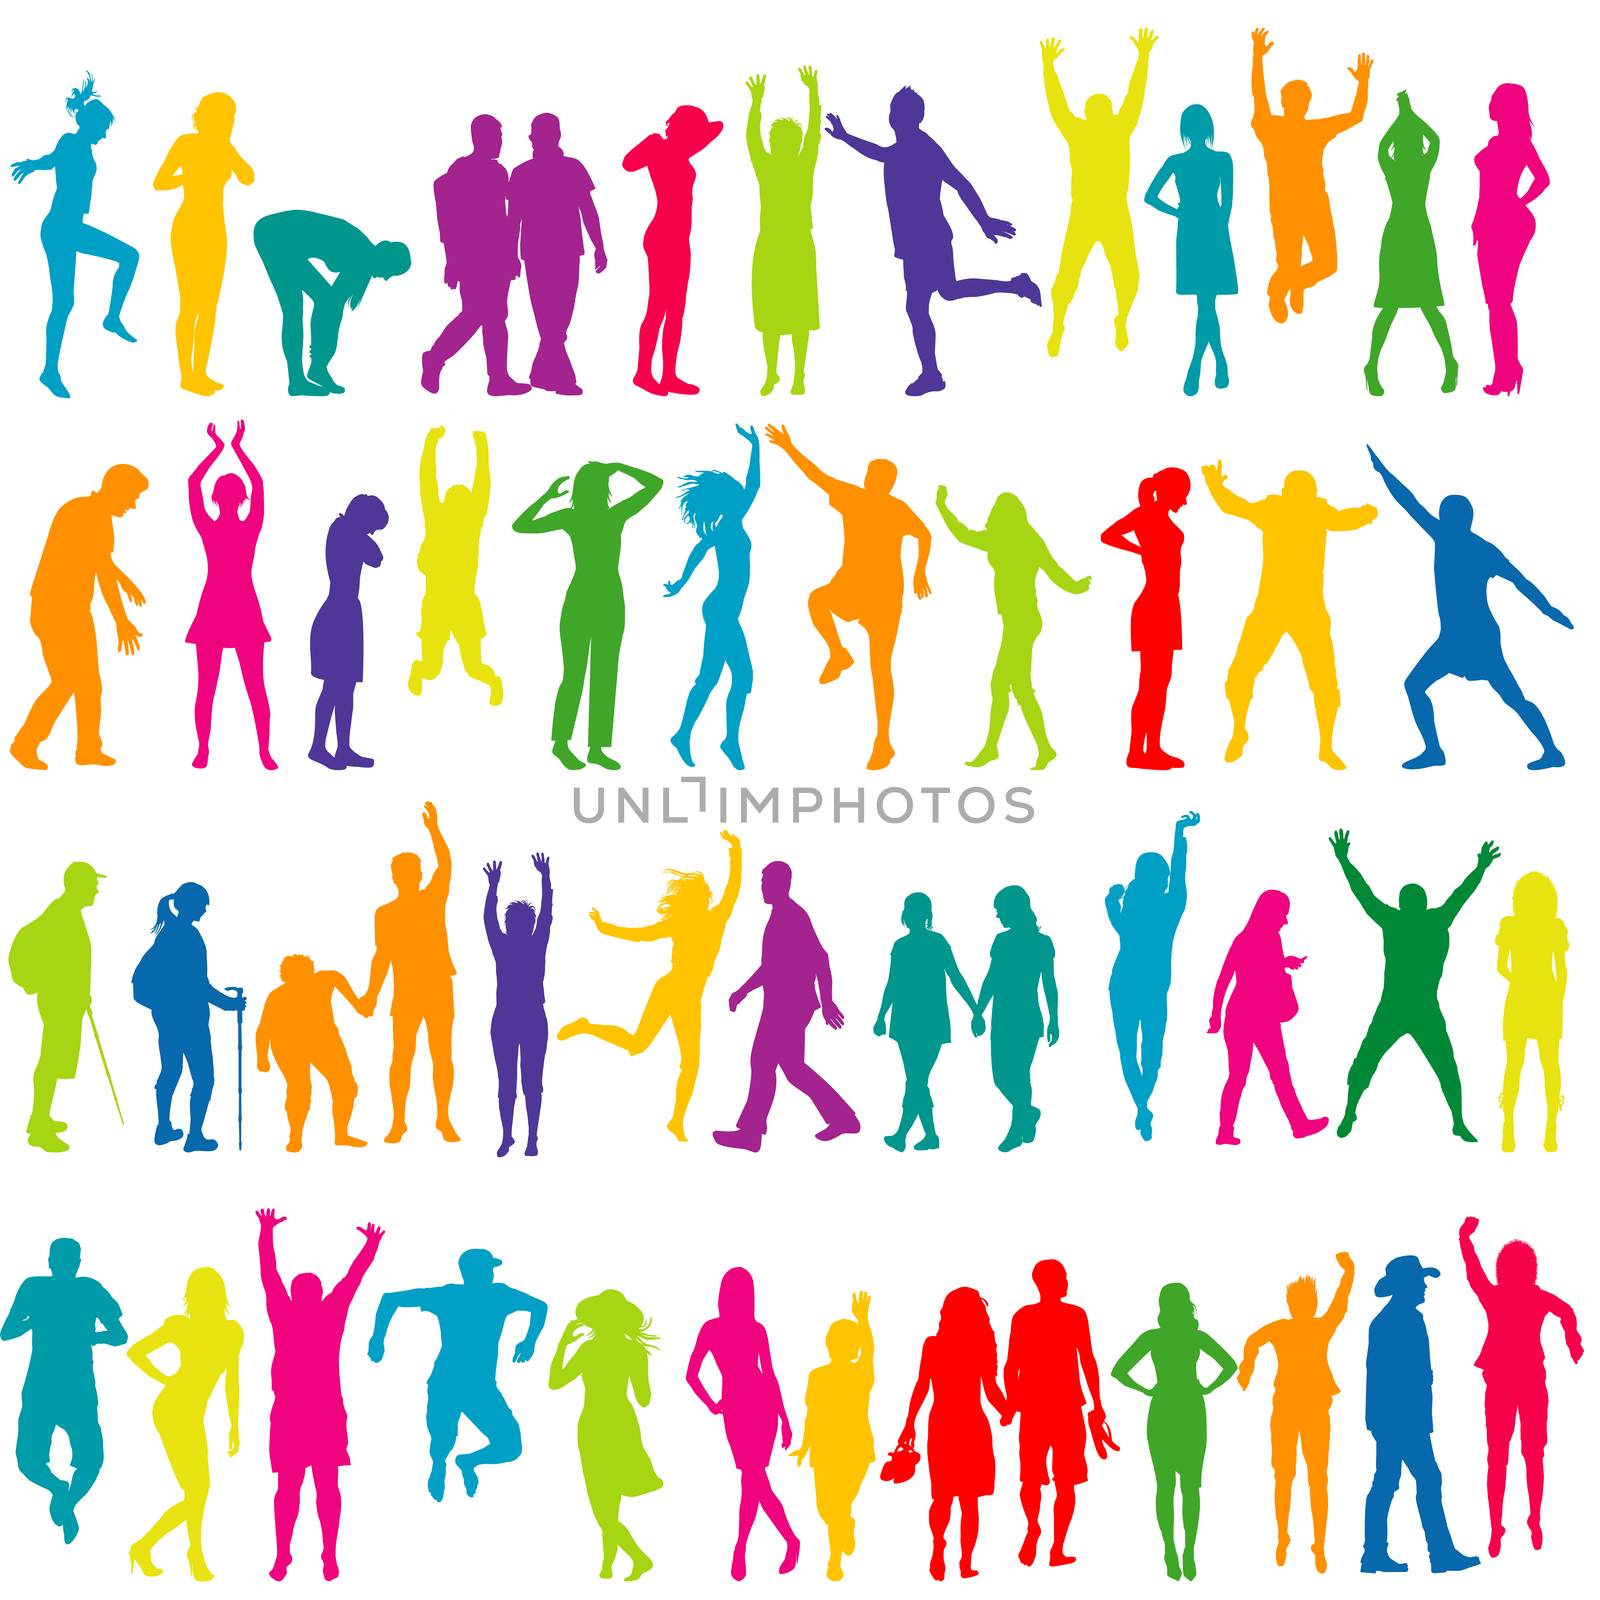 Colorful silhouettes of women and men